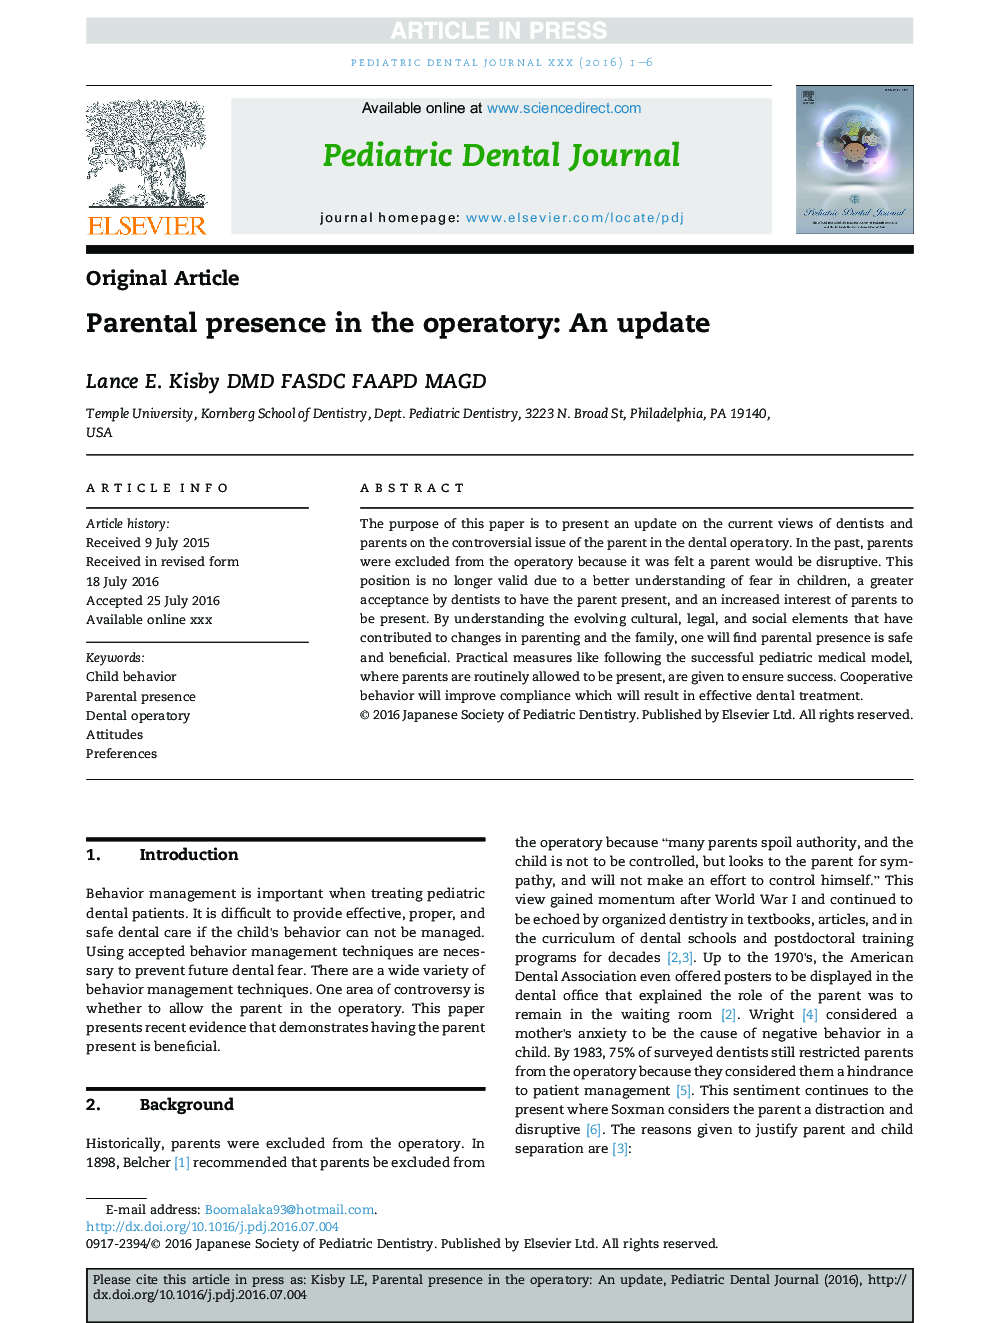 Parental presence in the operatory: An update